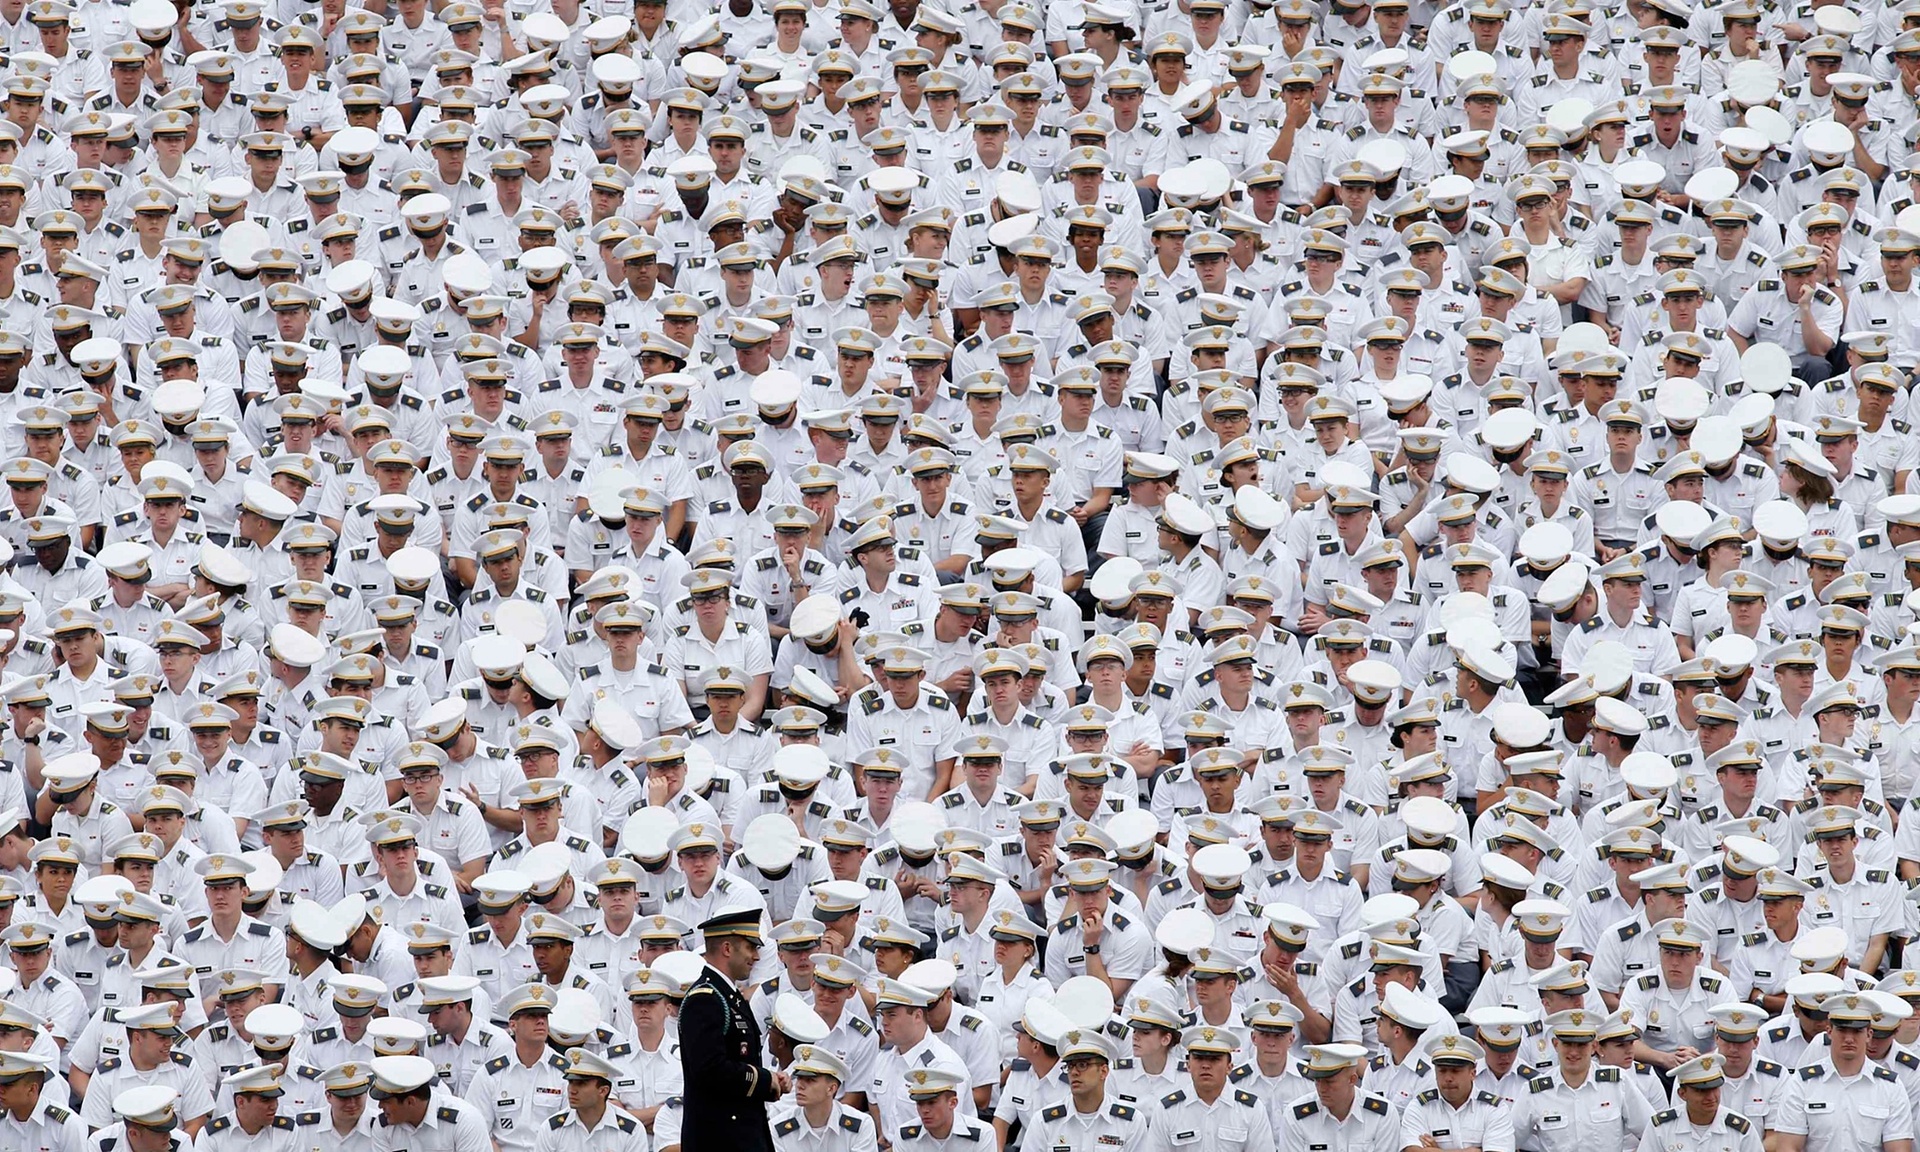 Students at West Point threatened with solitary confinement, separation from Academy for refusing risky covid vaccinations